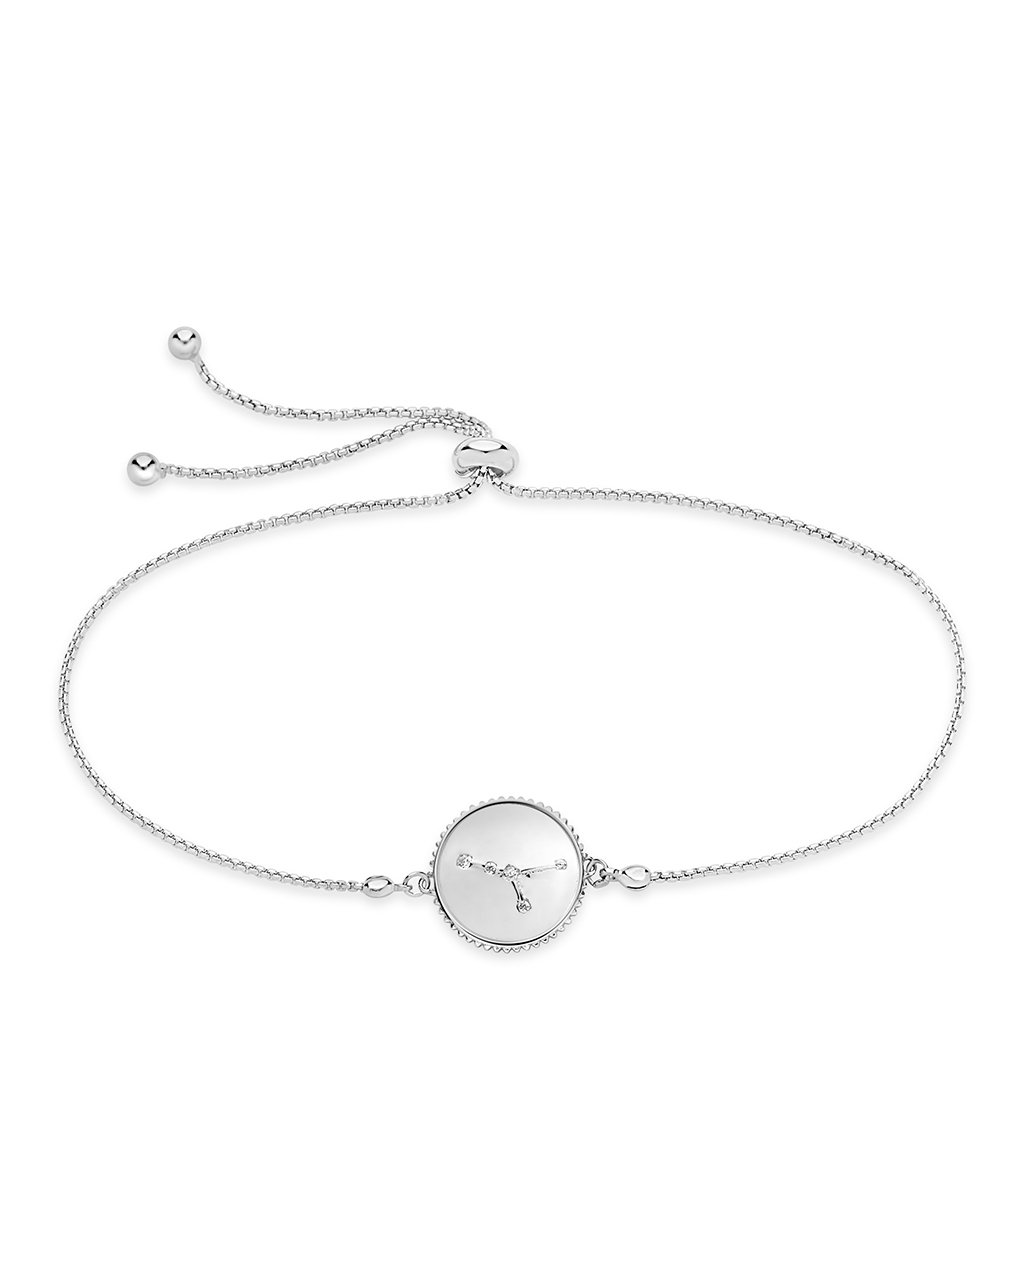 Sterling Silver Constellation Disk Bolo Bracelet Bracelet Sterling Forever Silver Cancer (Jun 21 - Jul 22) 